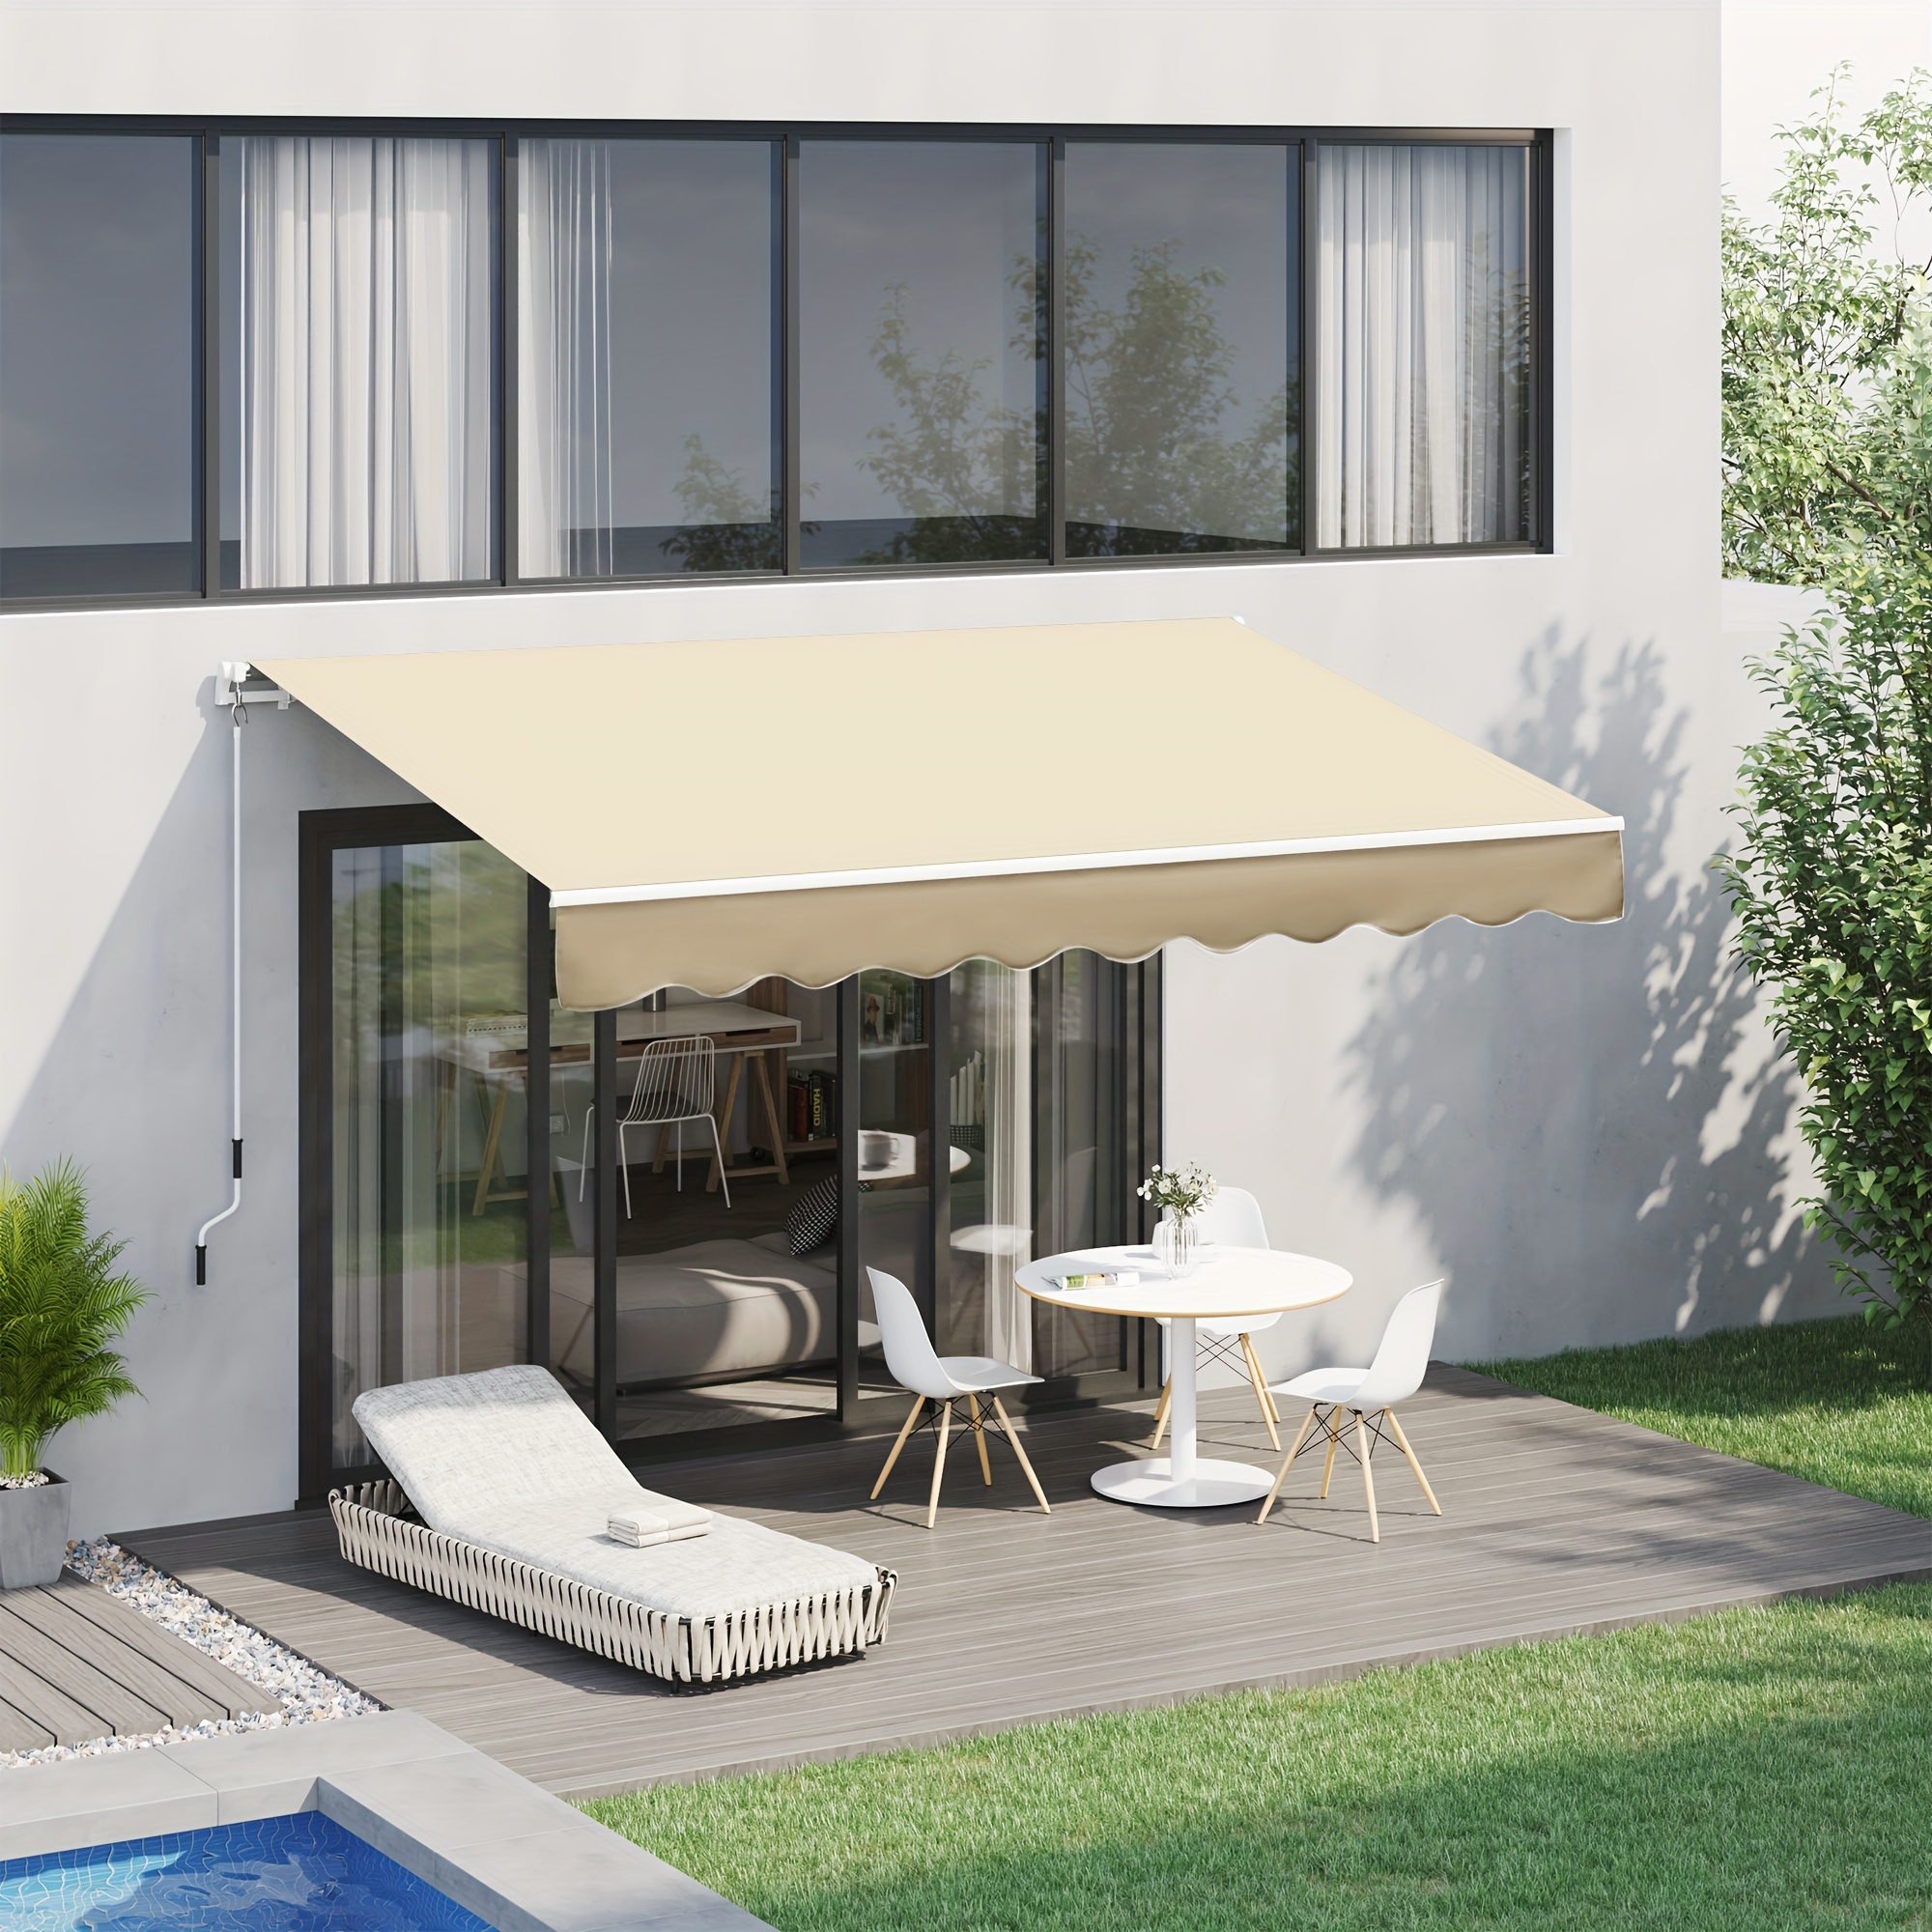 

Outsunny 10' X 8' Retractable Awning, Patio Awnings, Sunshade Shelter W/ Manual Crank Handle, Uv & Water-resistant Fabric And Aluminum Frame For Deck, Balcony, Yard, Beige